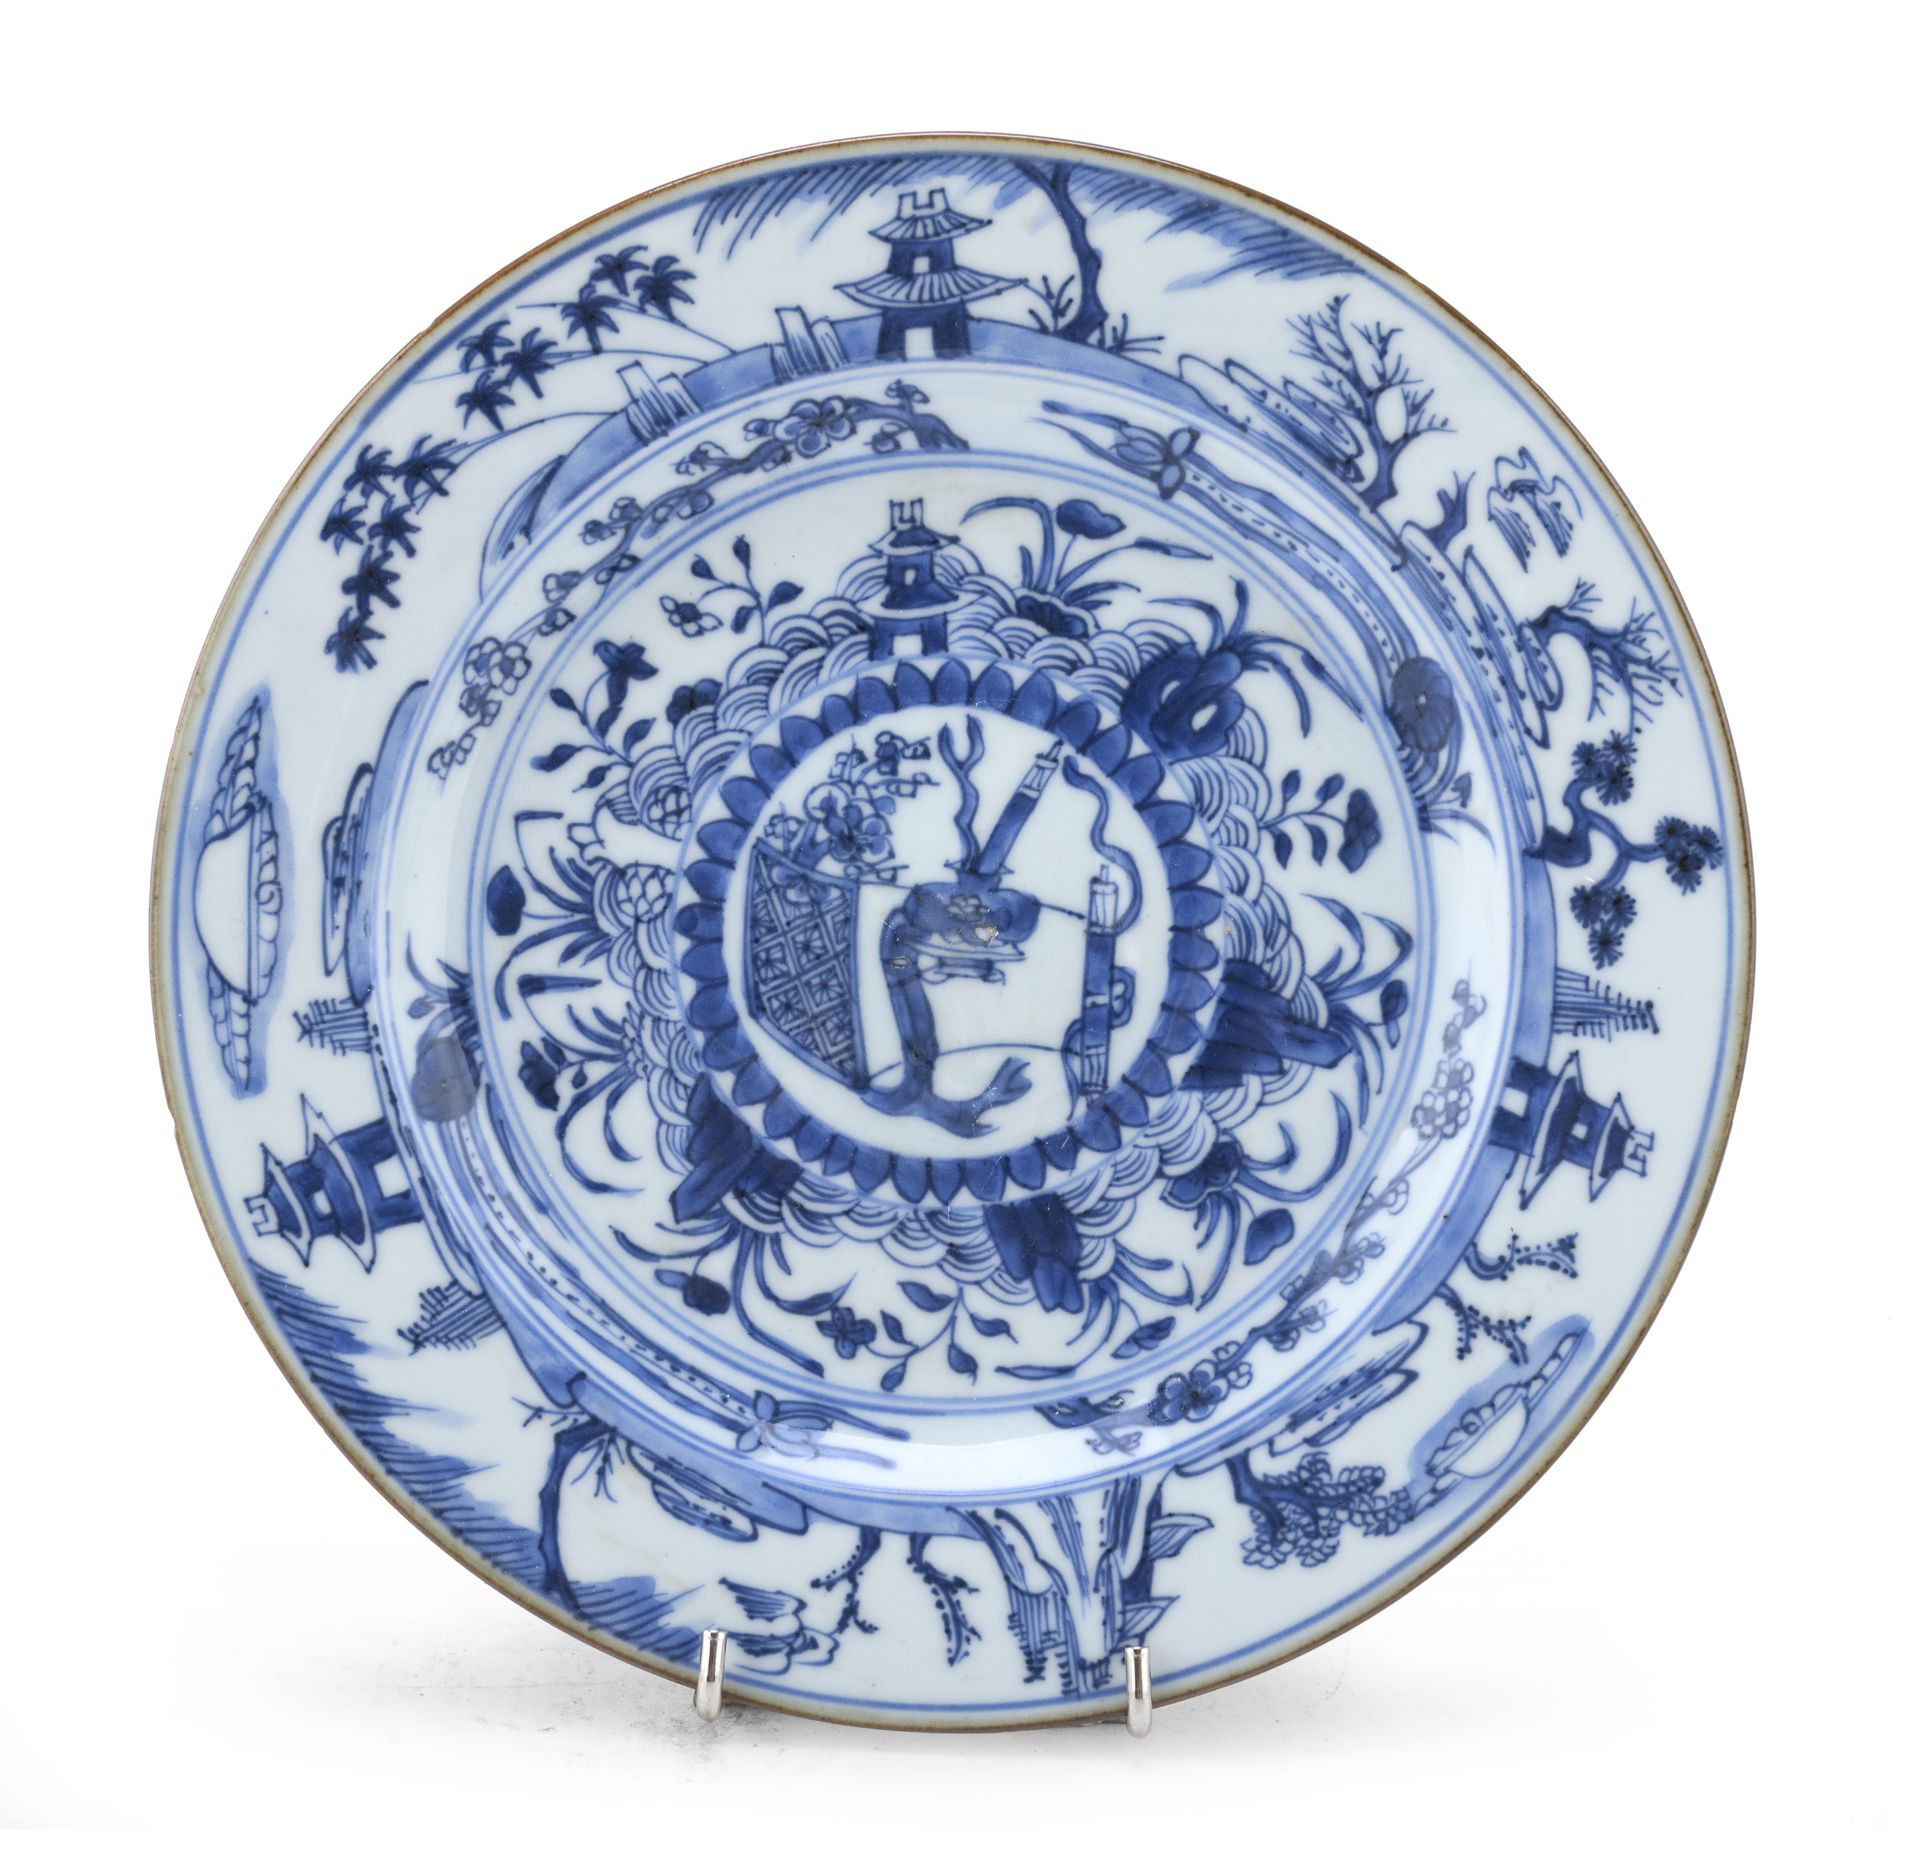 BLUE AND WHITE PORCELAIN SAUCER CHINA 18TH CENTURY